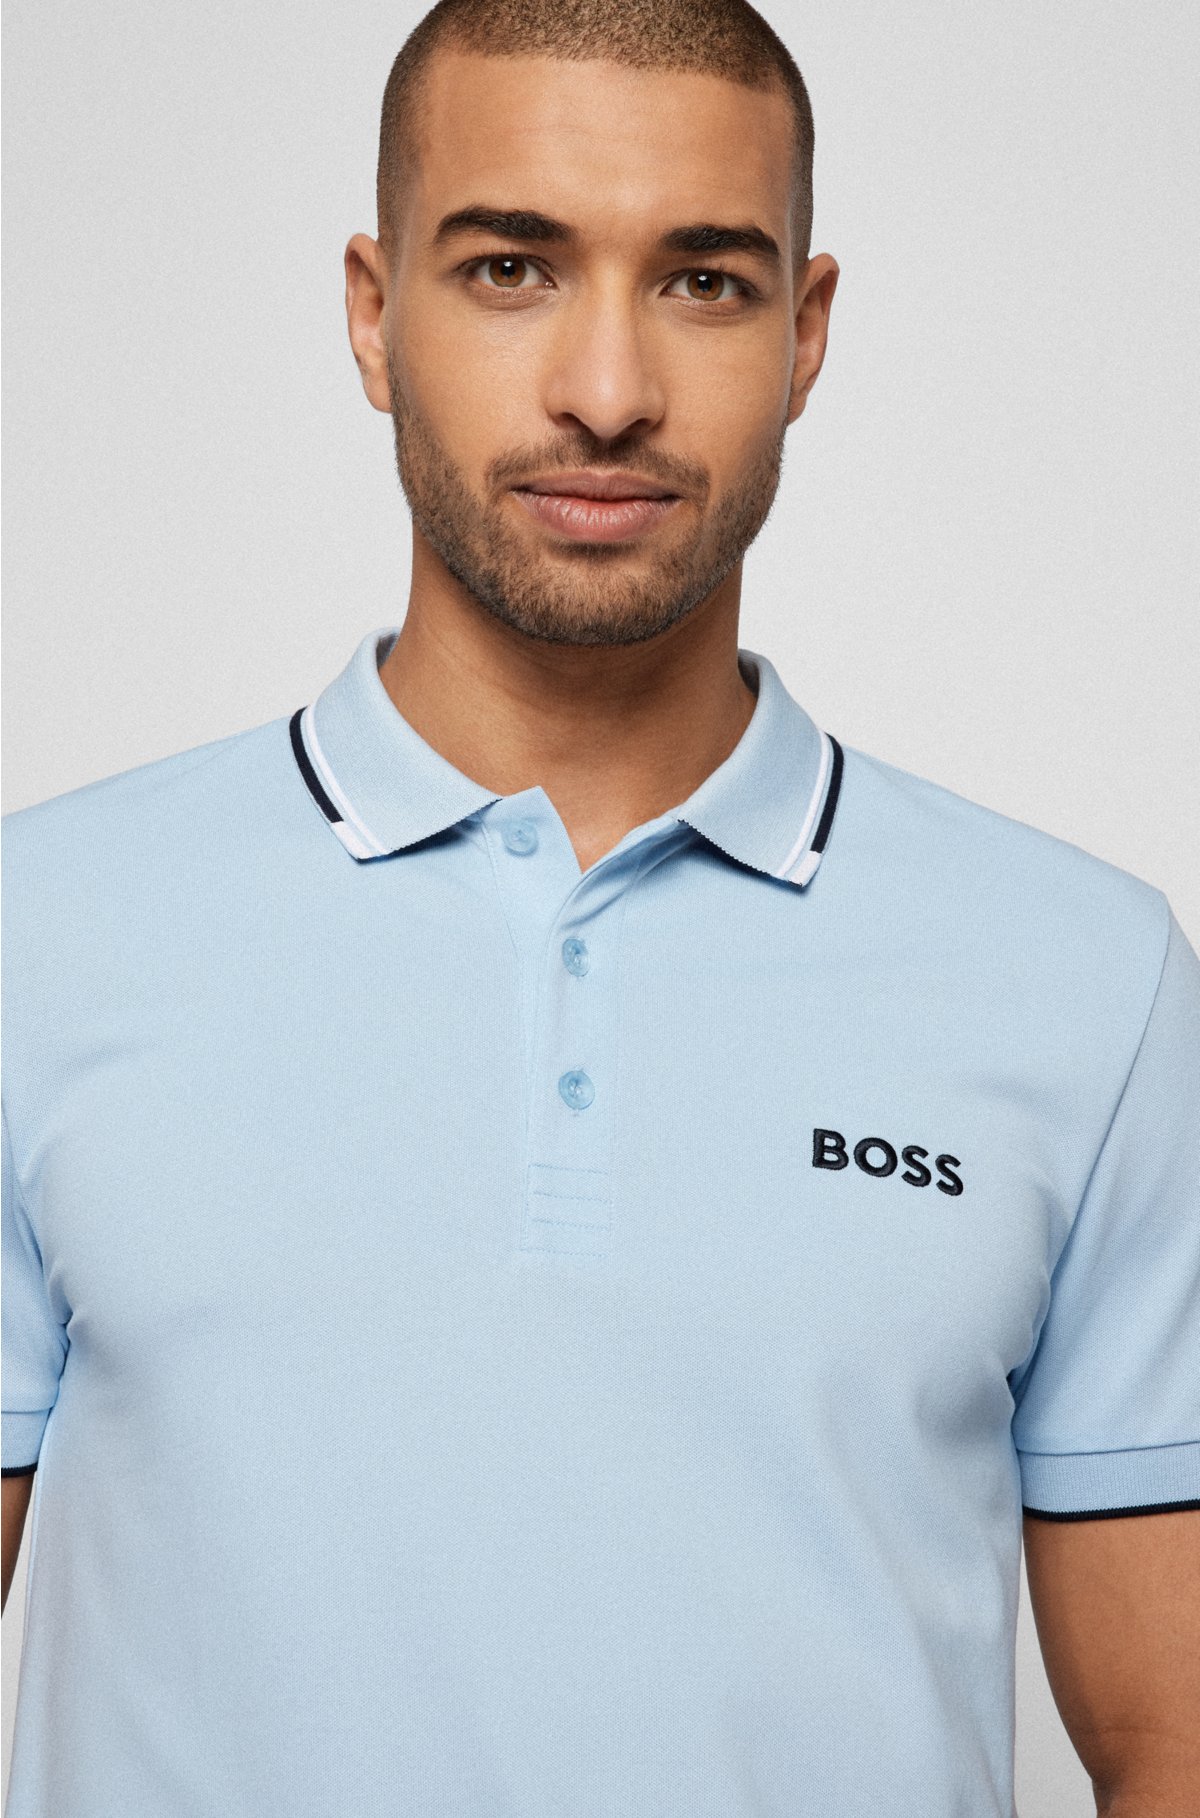 with Cotton-blend contrast polo shirt details - BOSS